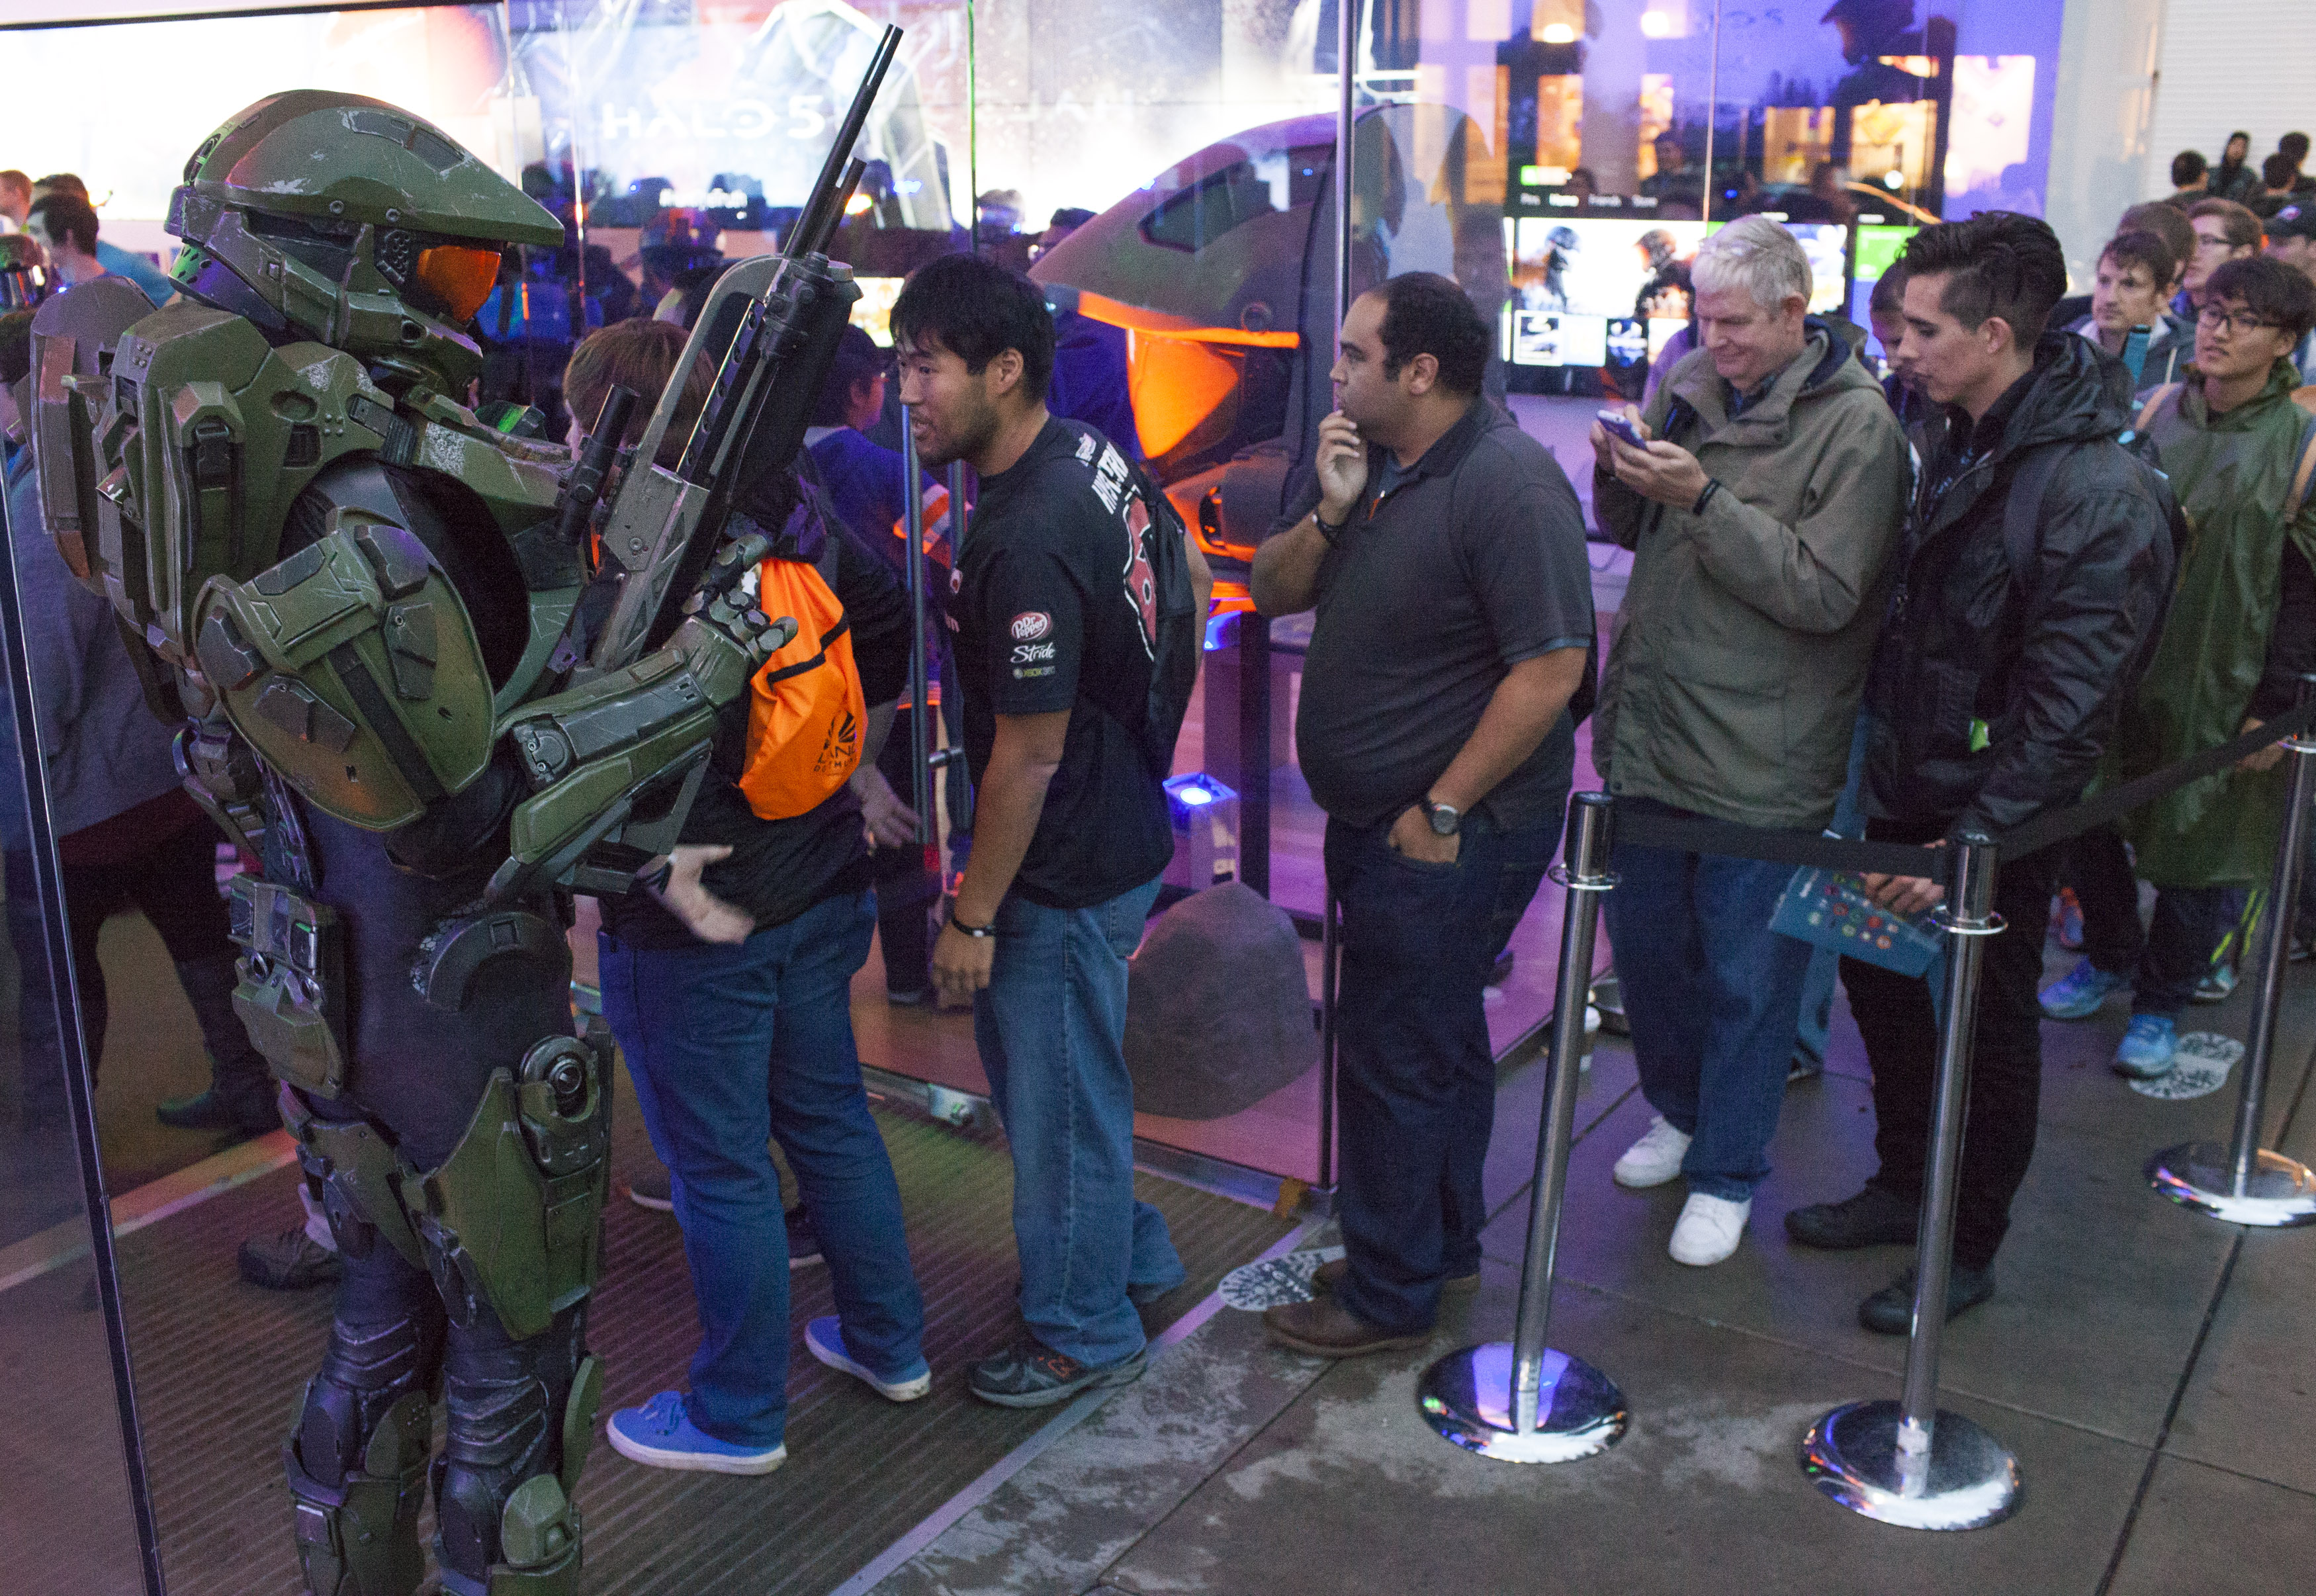 Seattle Halo 5 Launch Event showing fans in line to purchase Halo 5